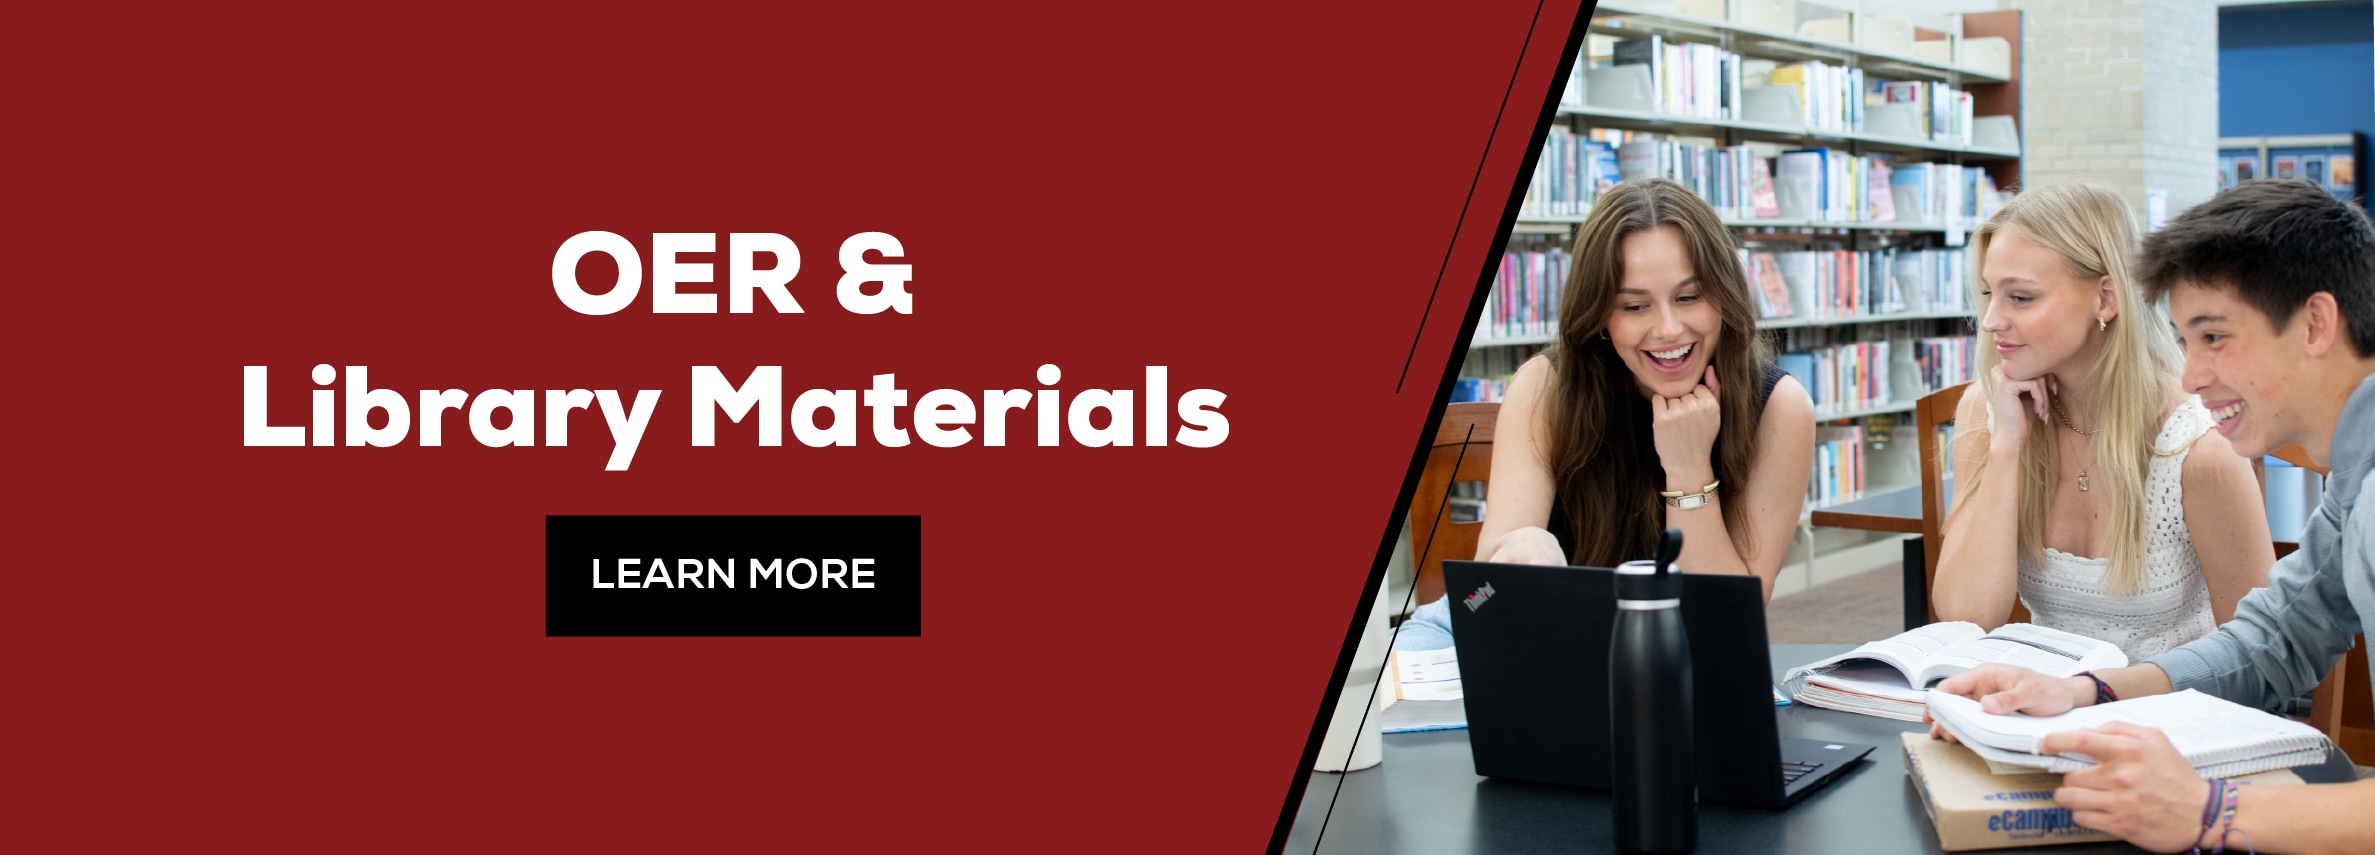 OER & LIBRARY MATERIALS. LEARN MORE (new tab)